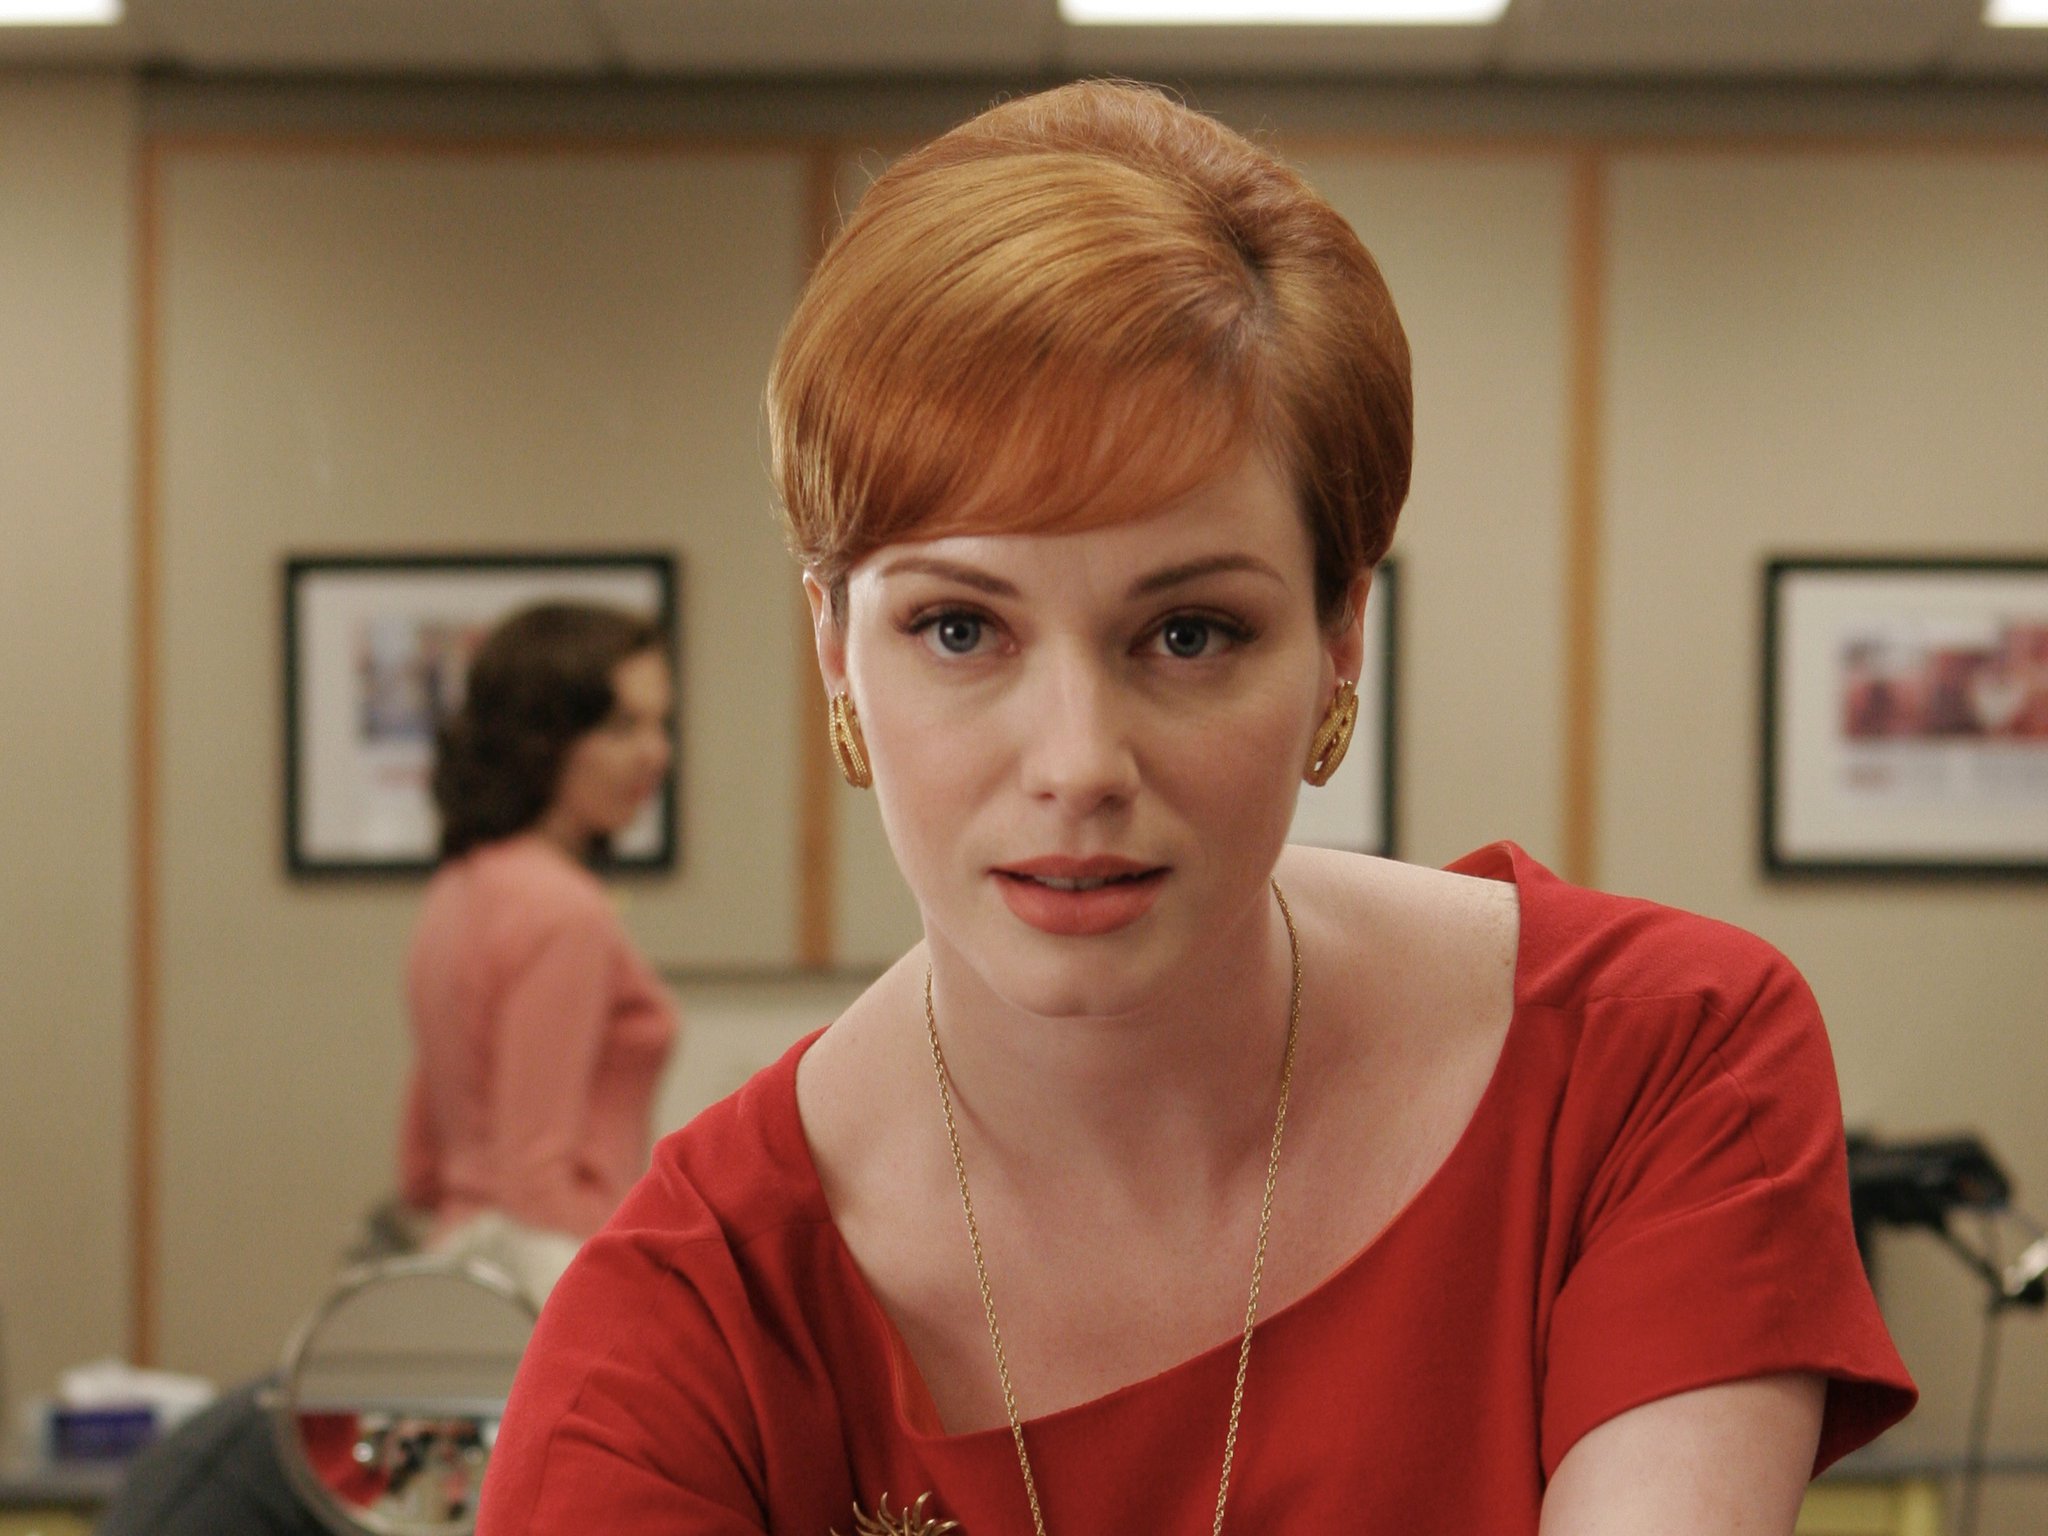 There\s never a dull moment when joan is around. happy birthday to the fabulous christina hendricks! 